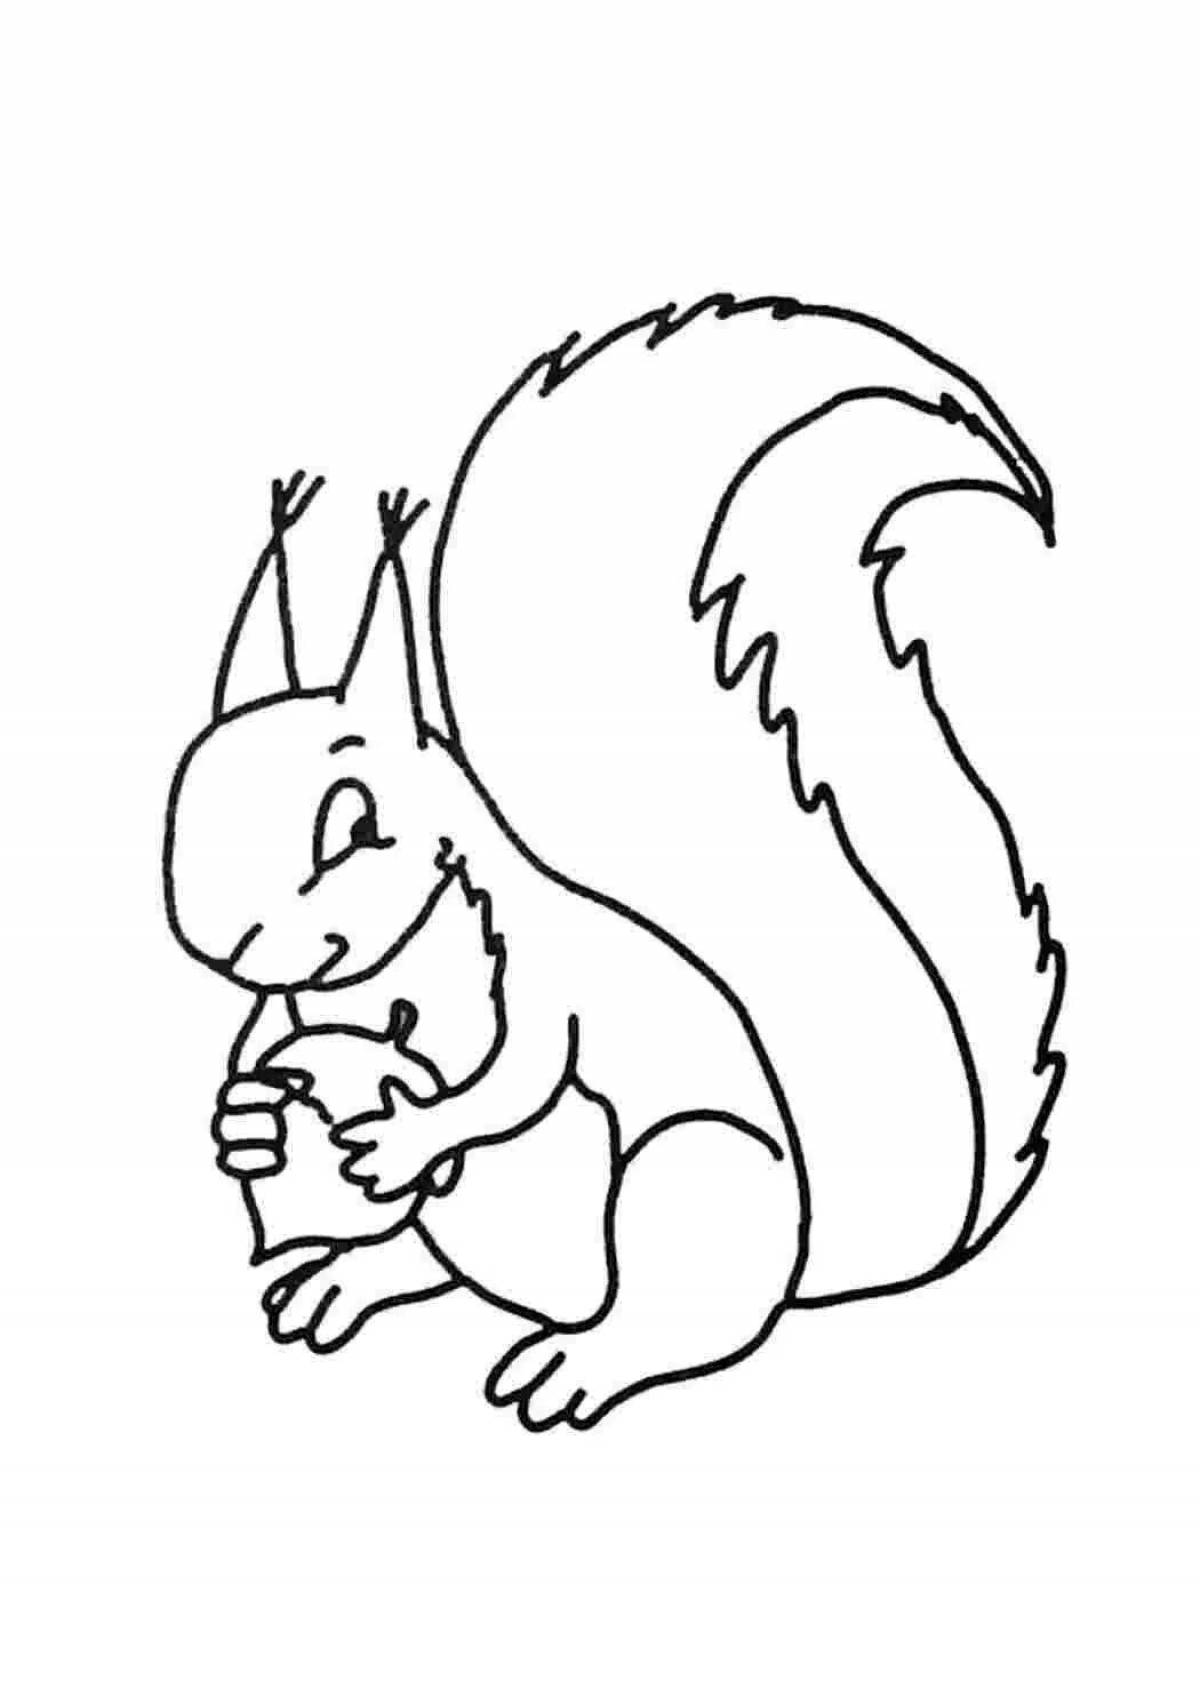 Delicate drawing of a squirrel